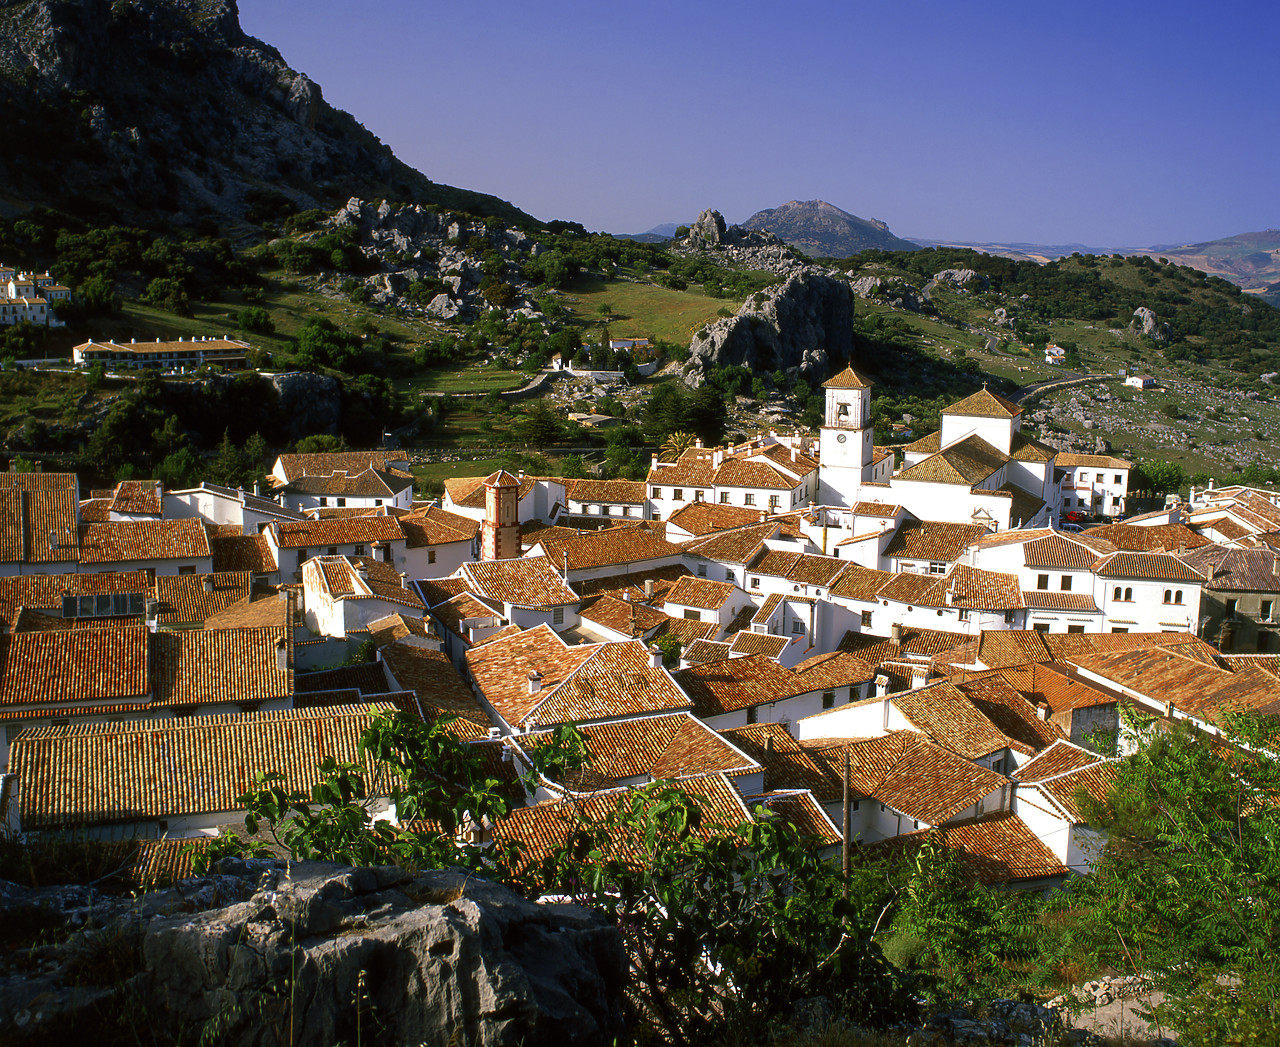 #050152-4 - View over Grazalema, Andalusia, Spain